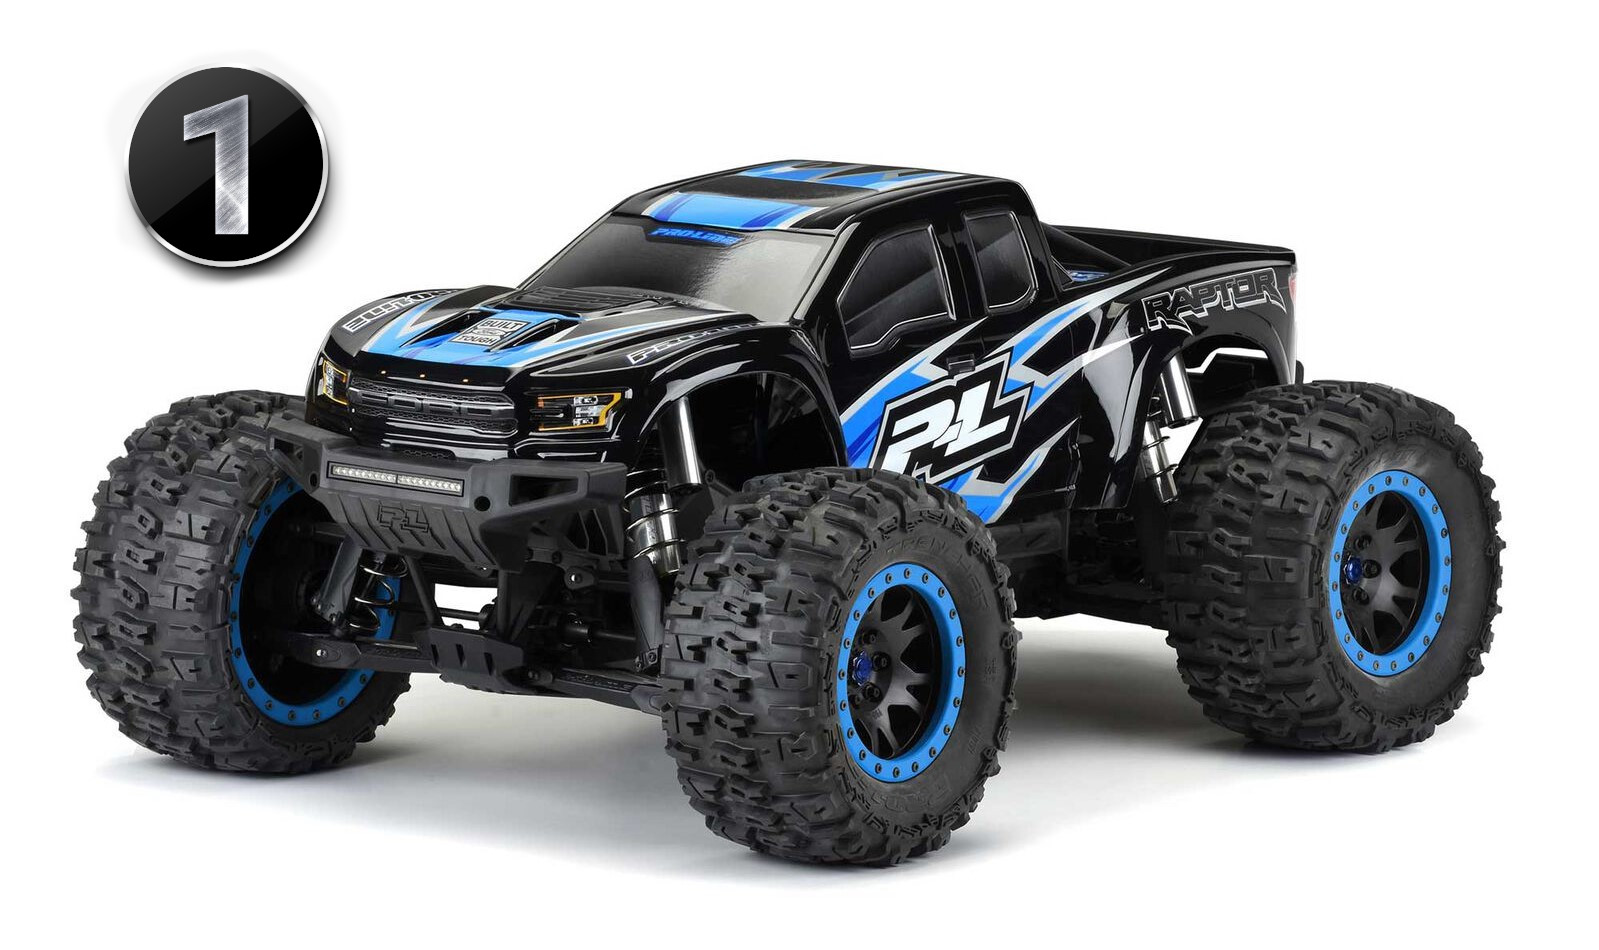 Our Favorite Pro-Line Parts For the Traxxas X-Maxx